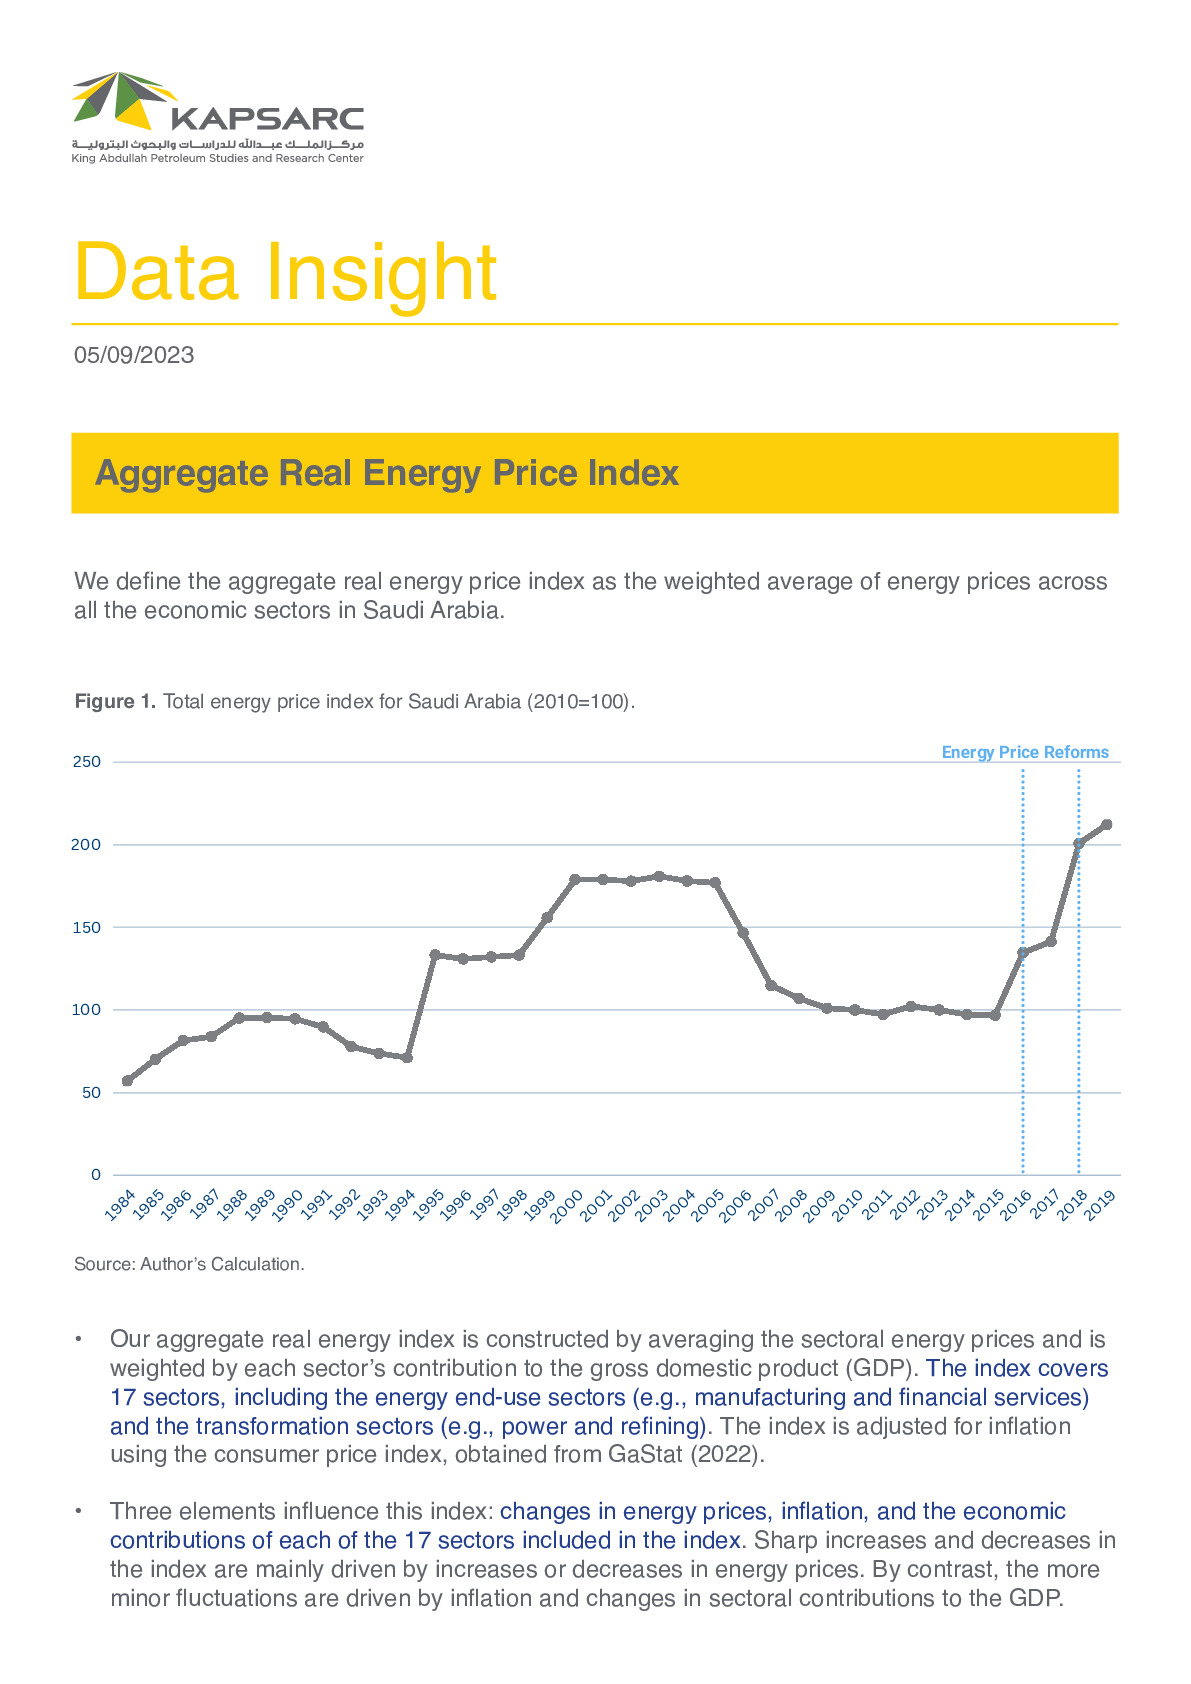 Aggregate Real Energy Price Index